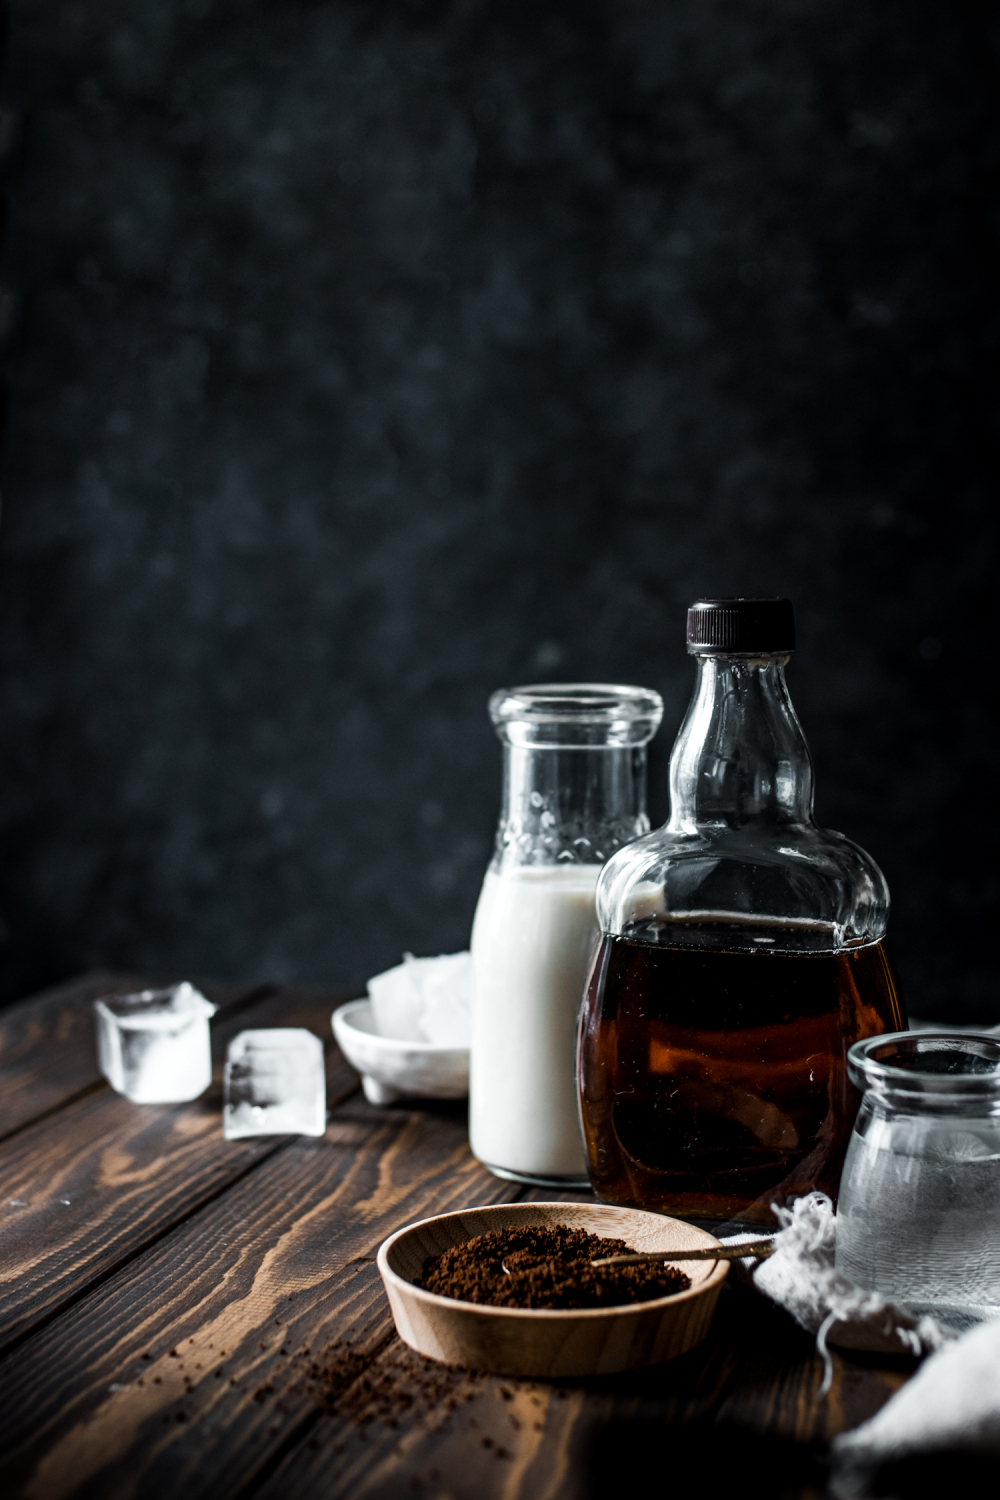 All ingredients needed for dalgona: milk maple syrup, ice